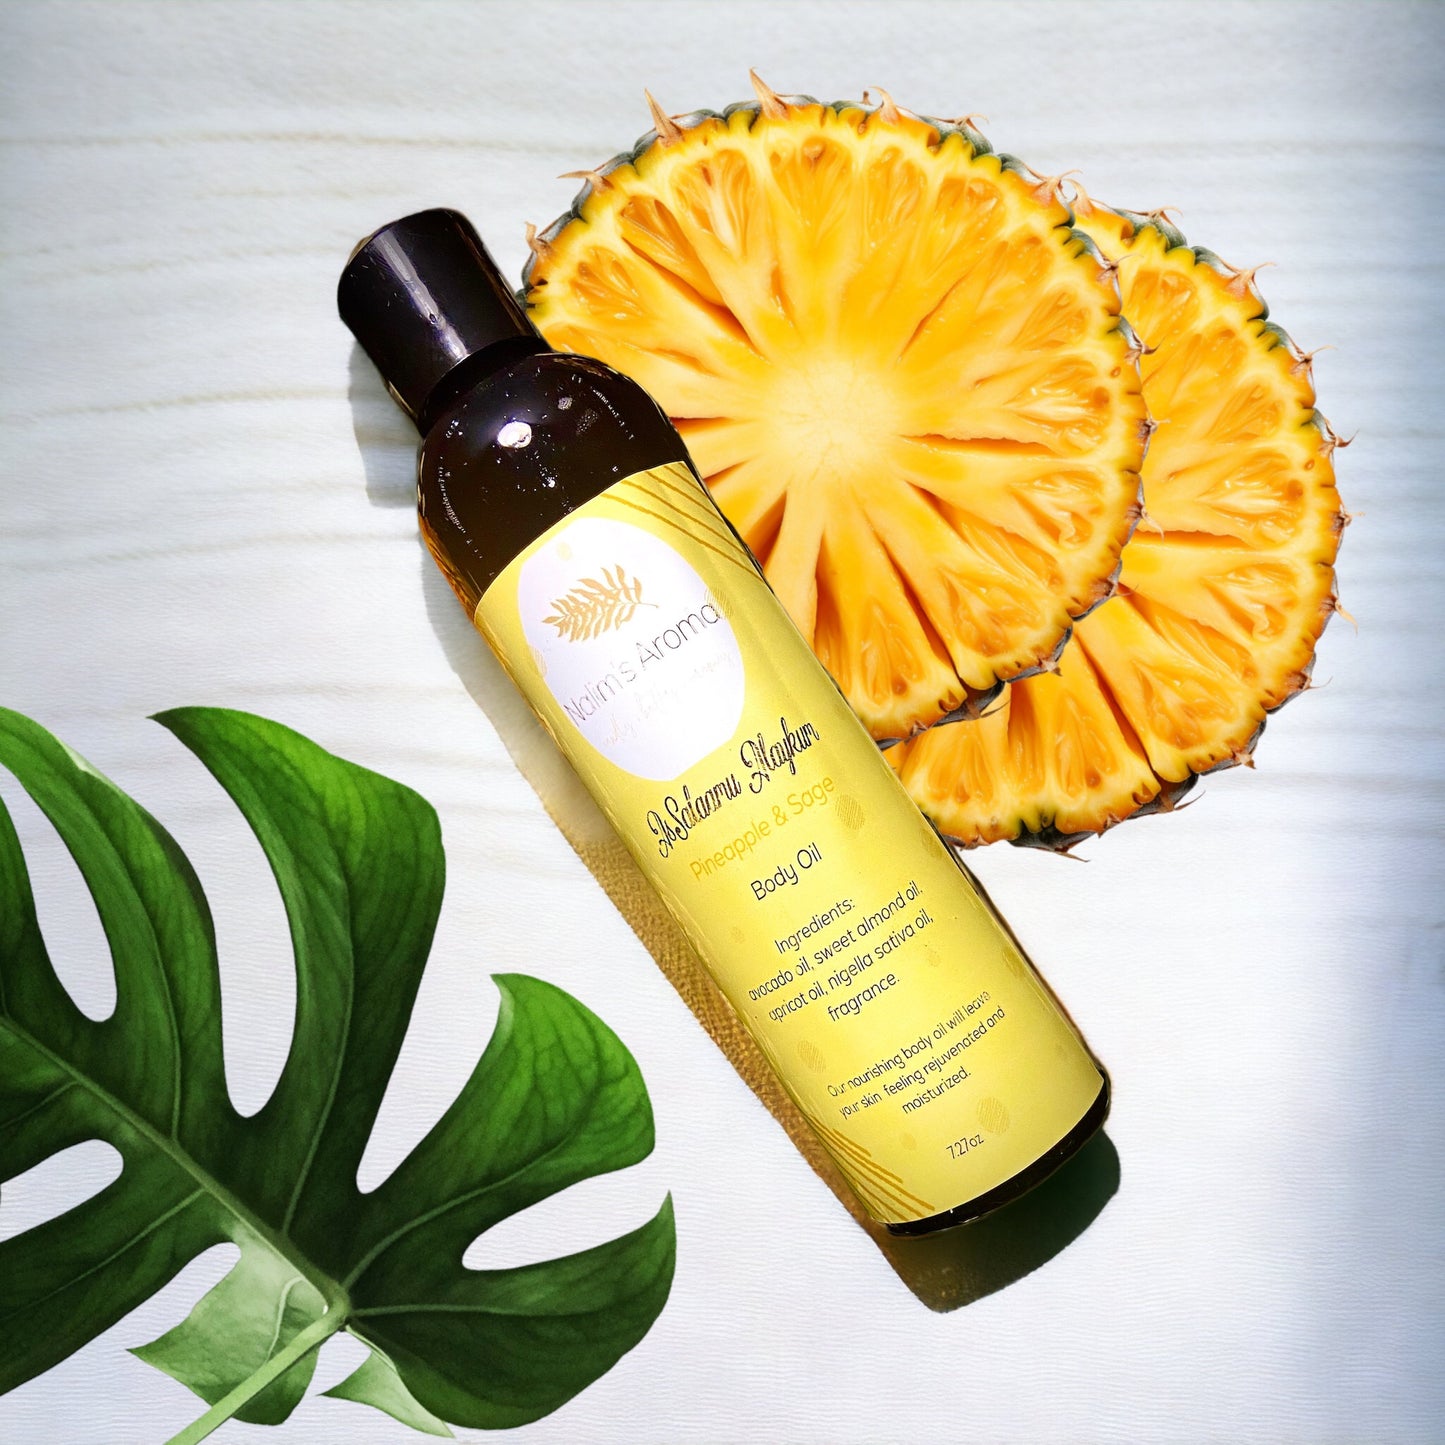 Nalim’s Aroma’s Pineapple and Sage scented body oil 